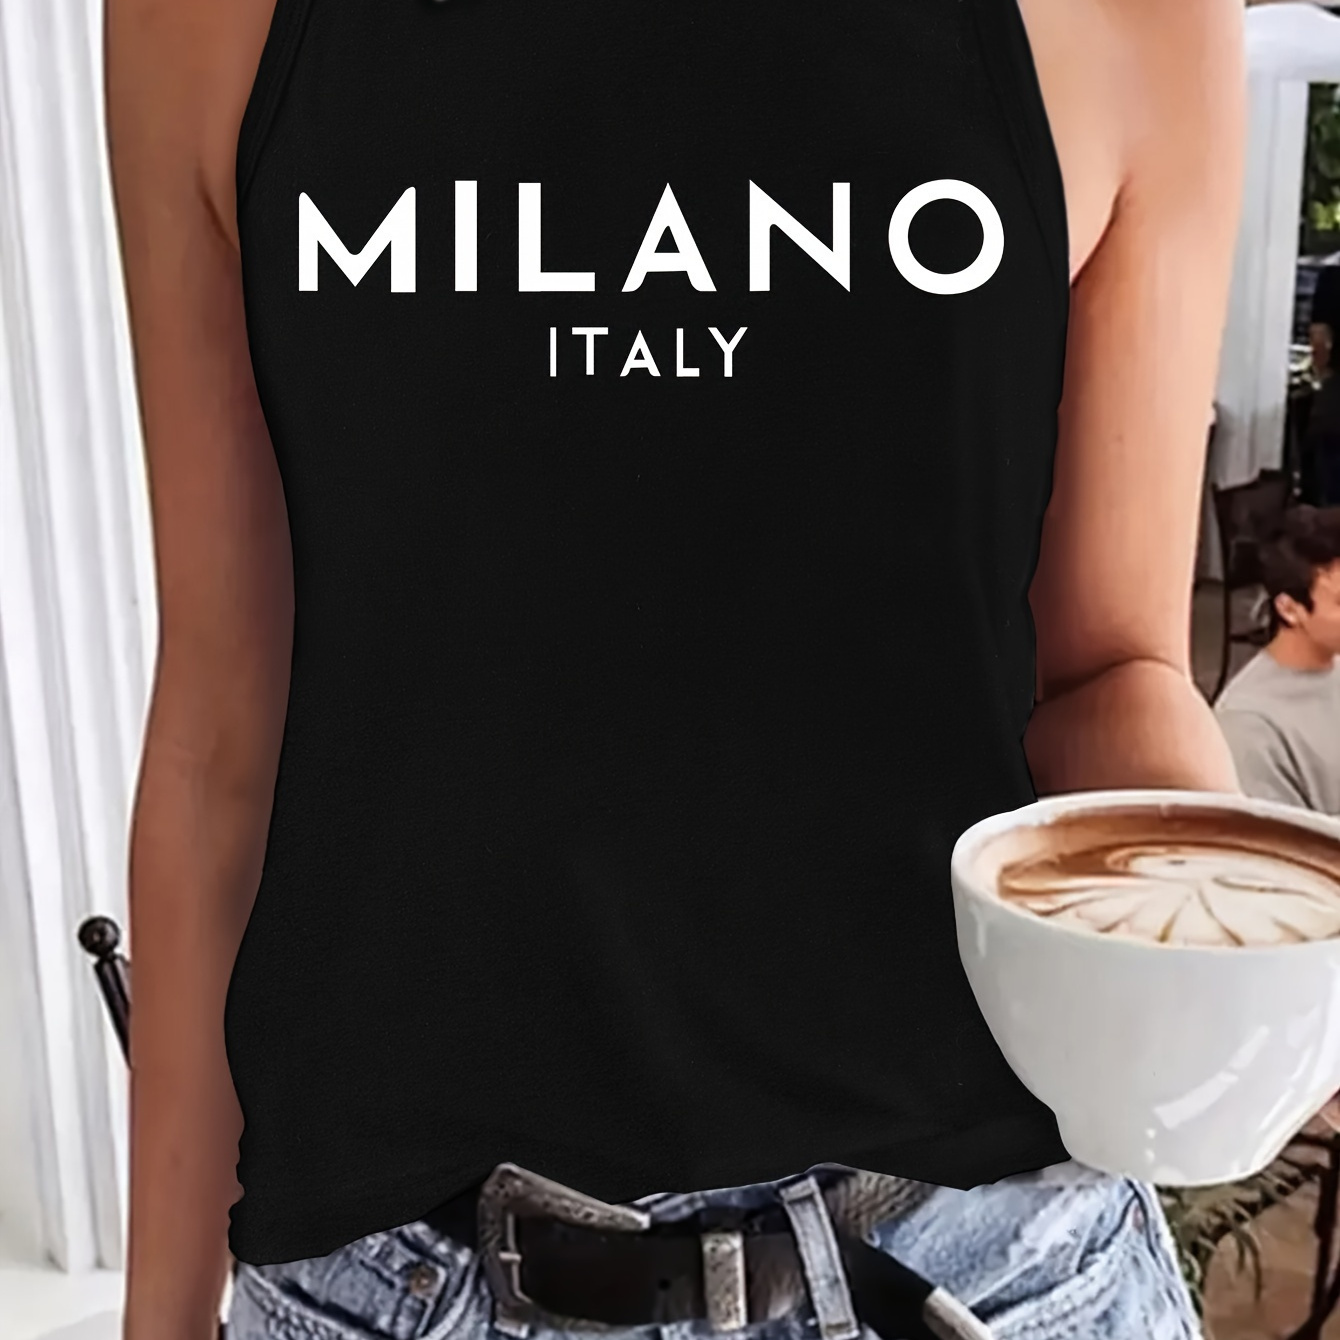 

Milano Print Crew Neck Tank Top, Casual Sleeveless Top For Summer, Women's Clothing